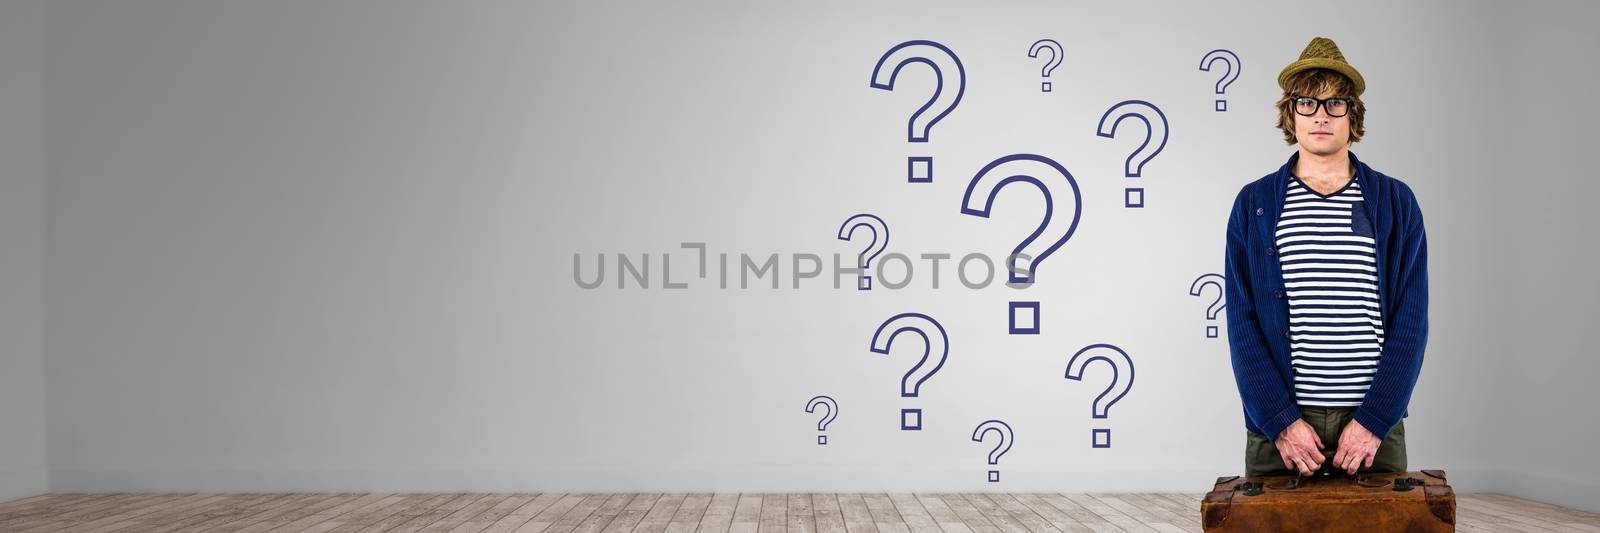 Digital composite of Man with travel bag and blue question marks